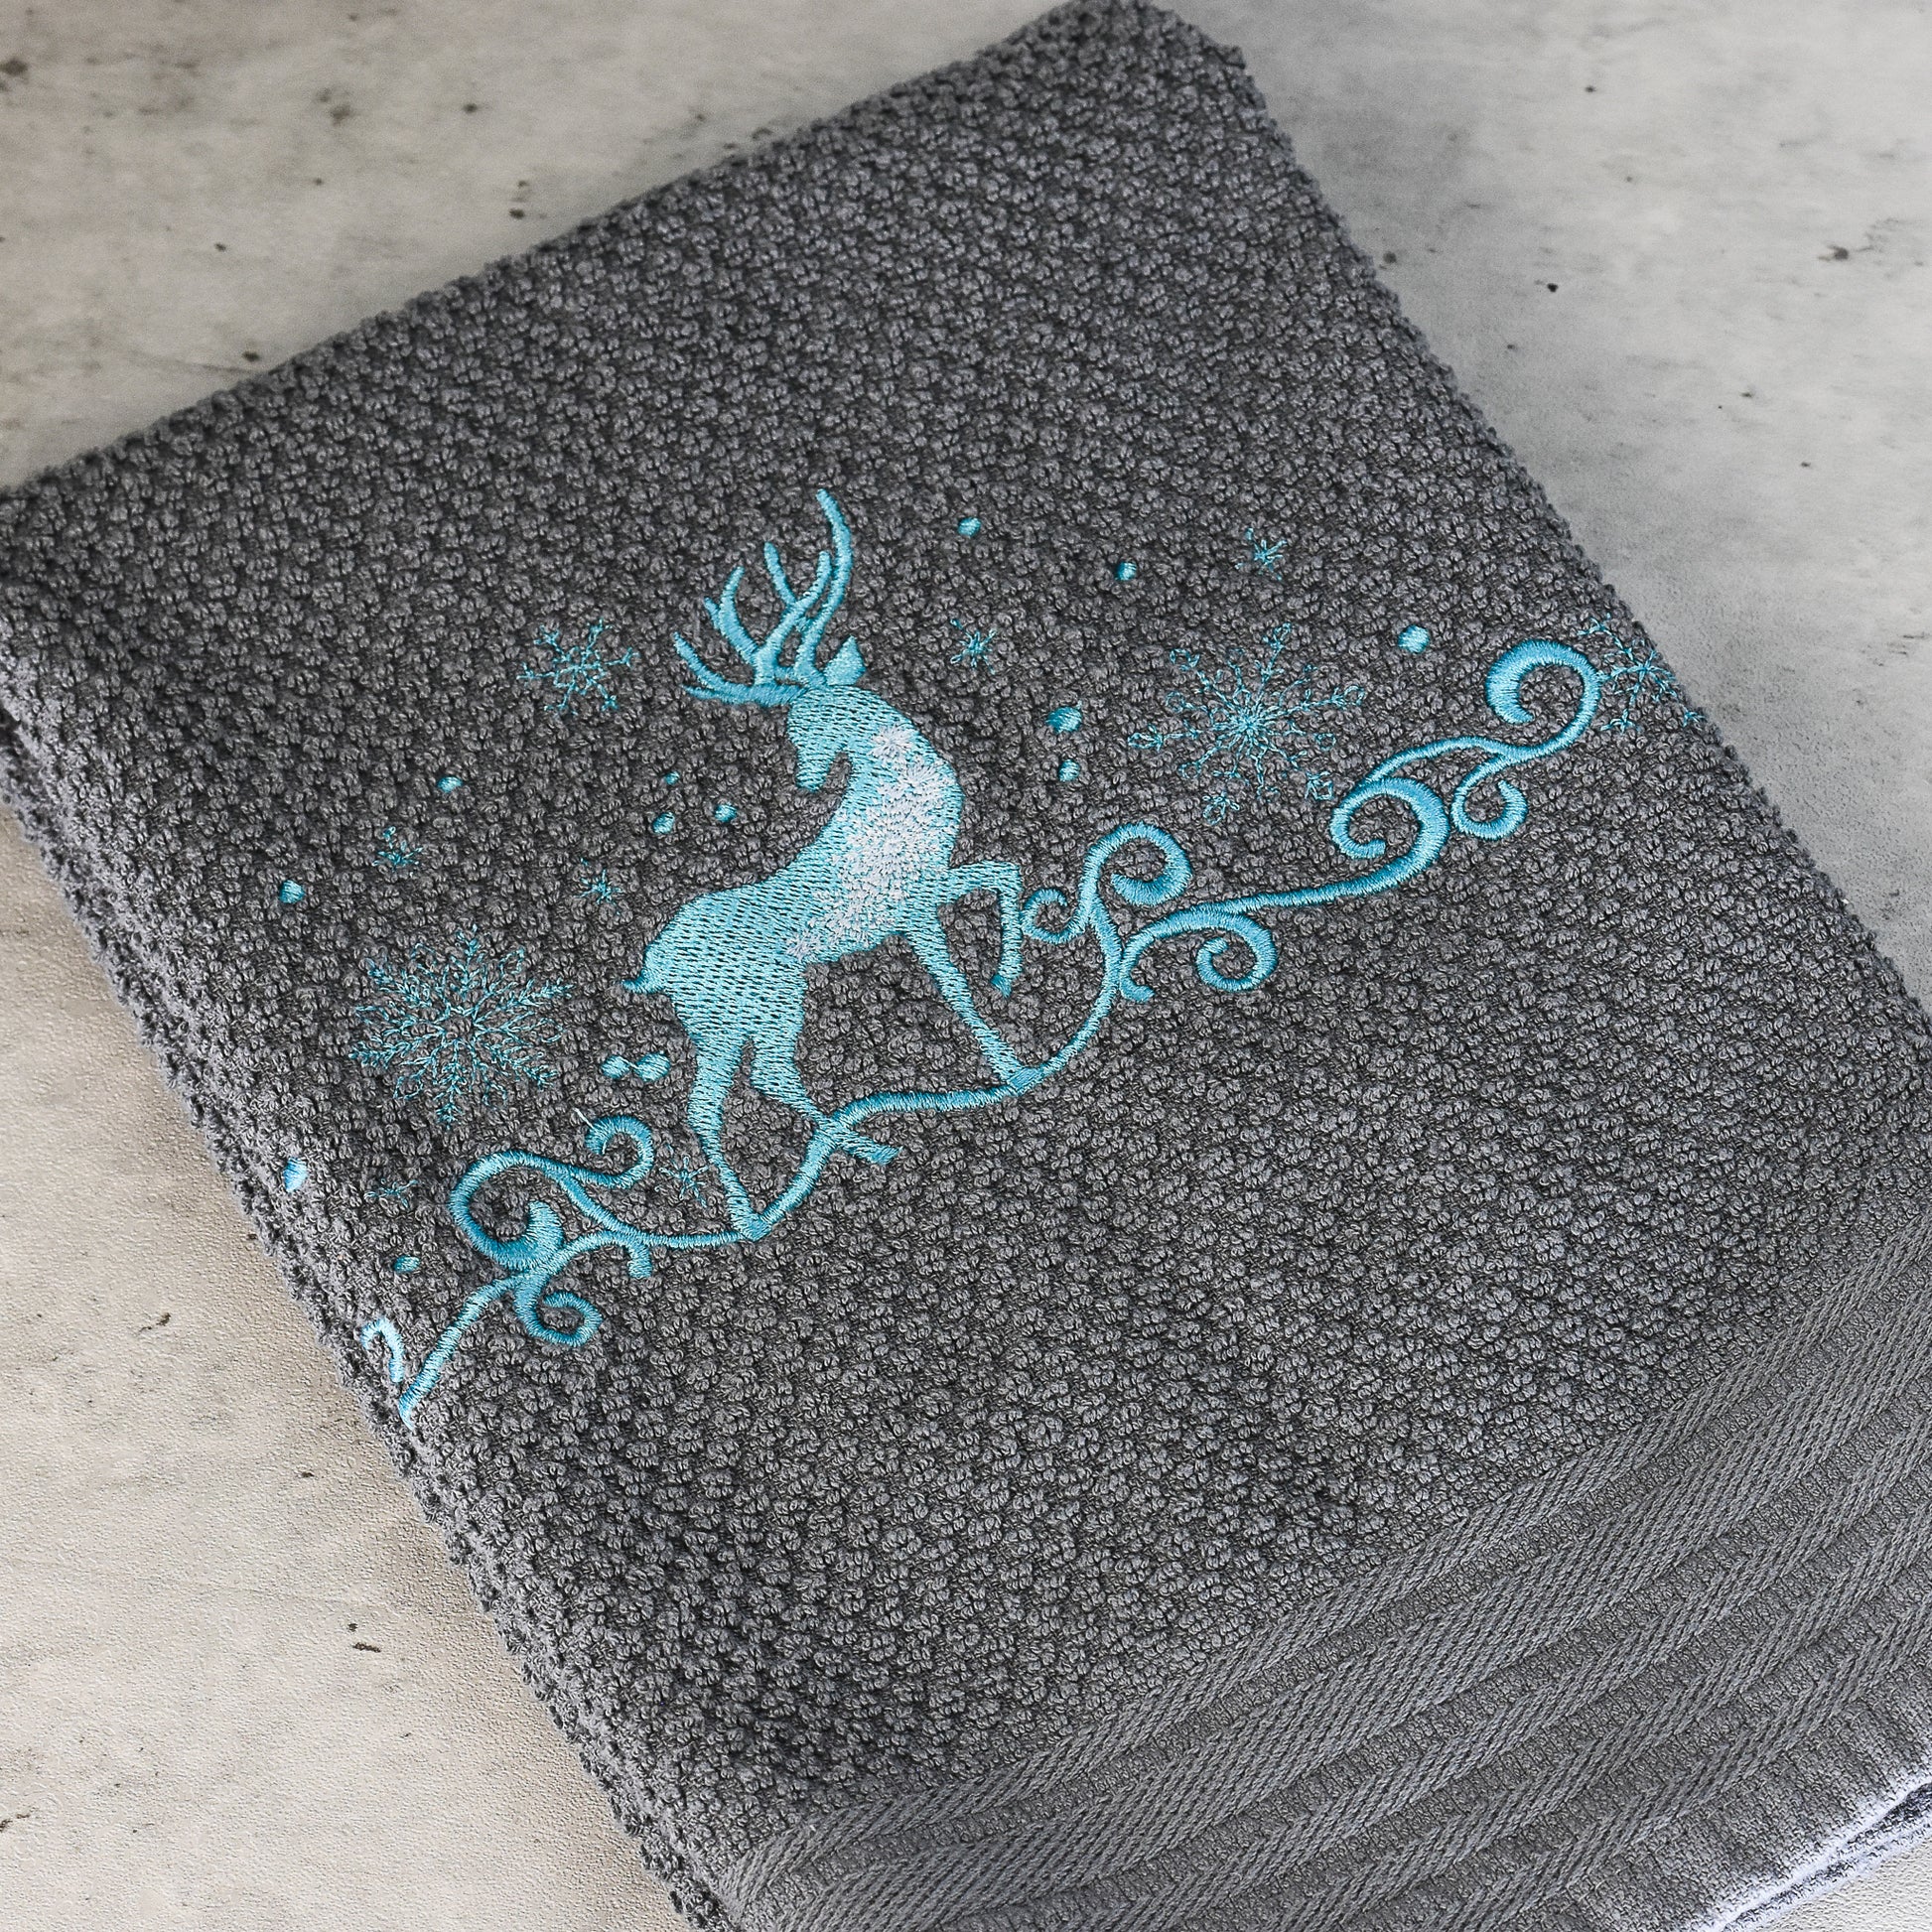 Embroidered Magical reindeer and snowflake hand towel  made of 100% cotton waffle weave toweling